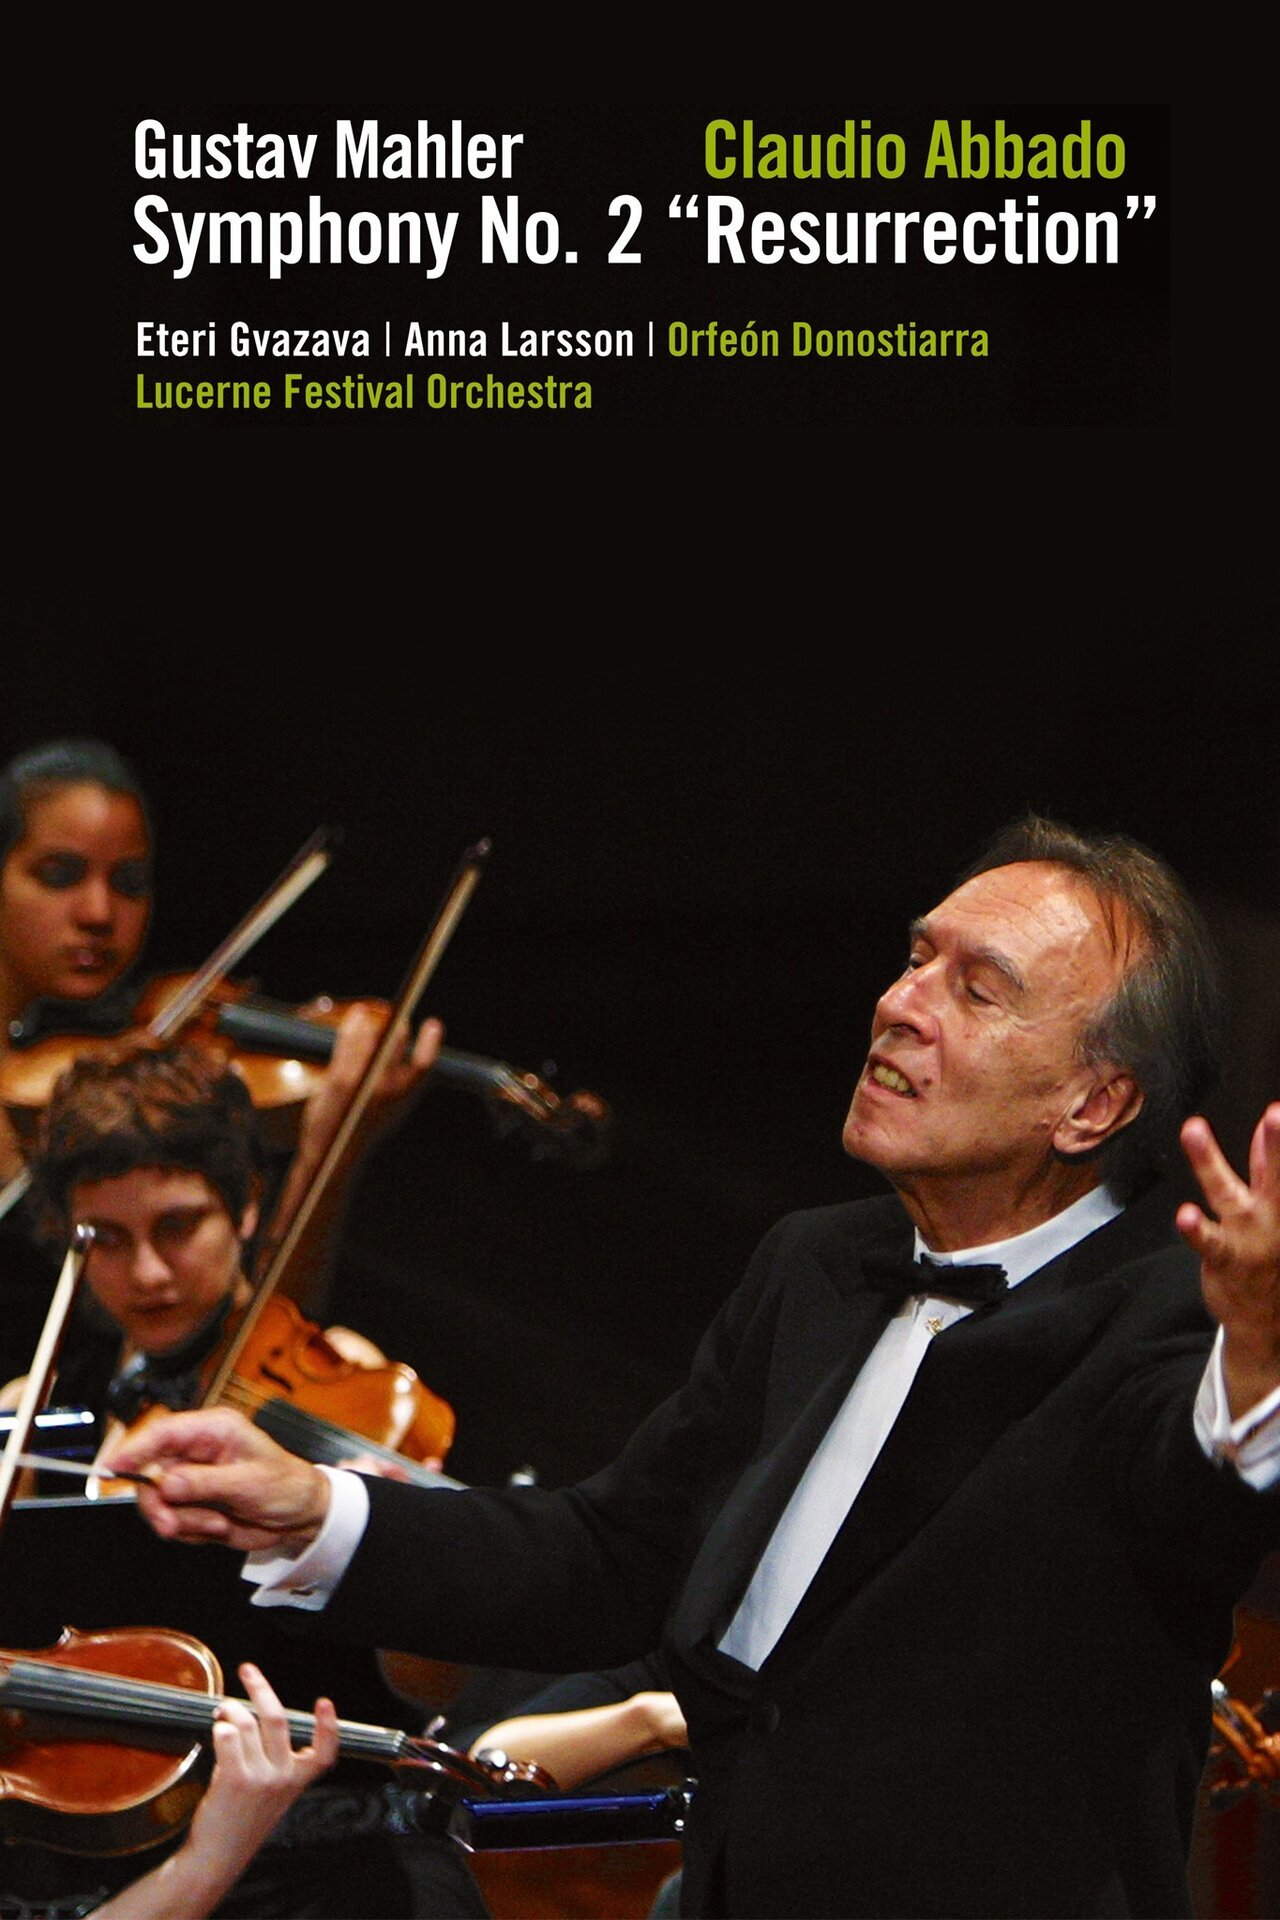 Claudio Abbado conducts Mahler's Symphony No.2 at the Lucerne Festival